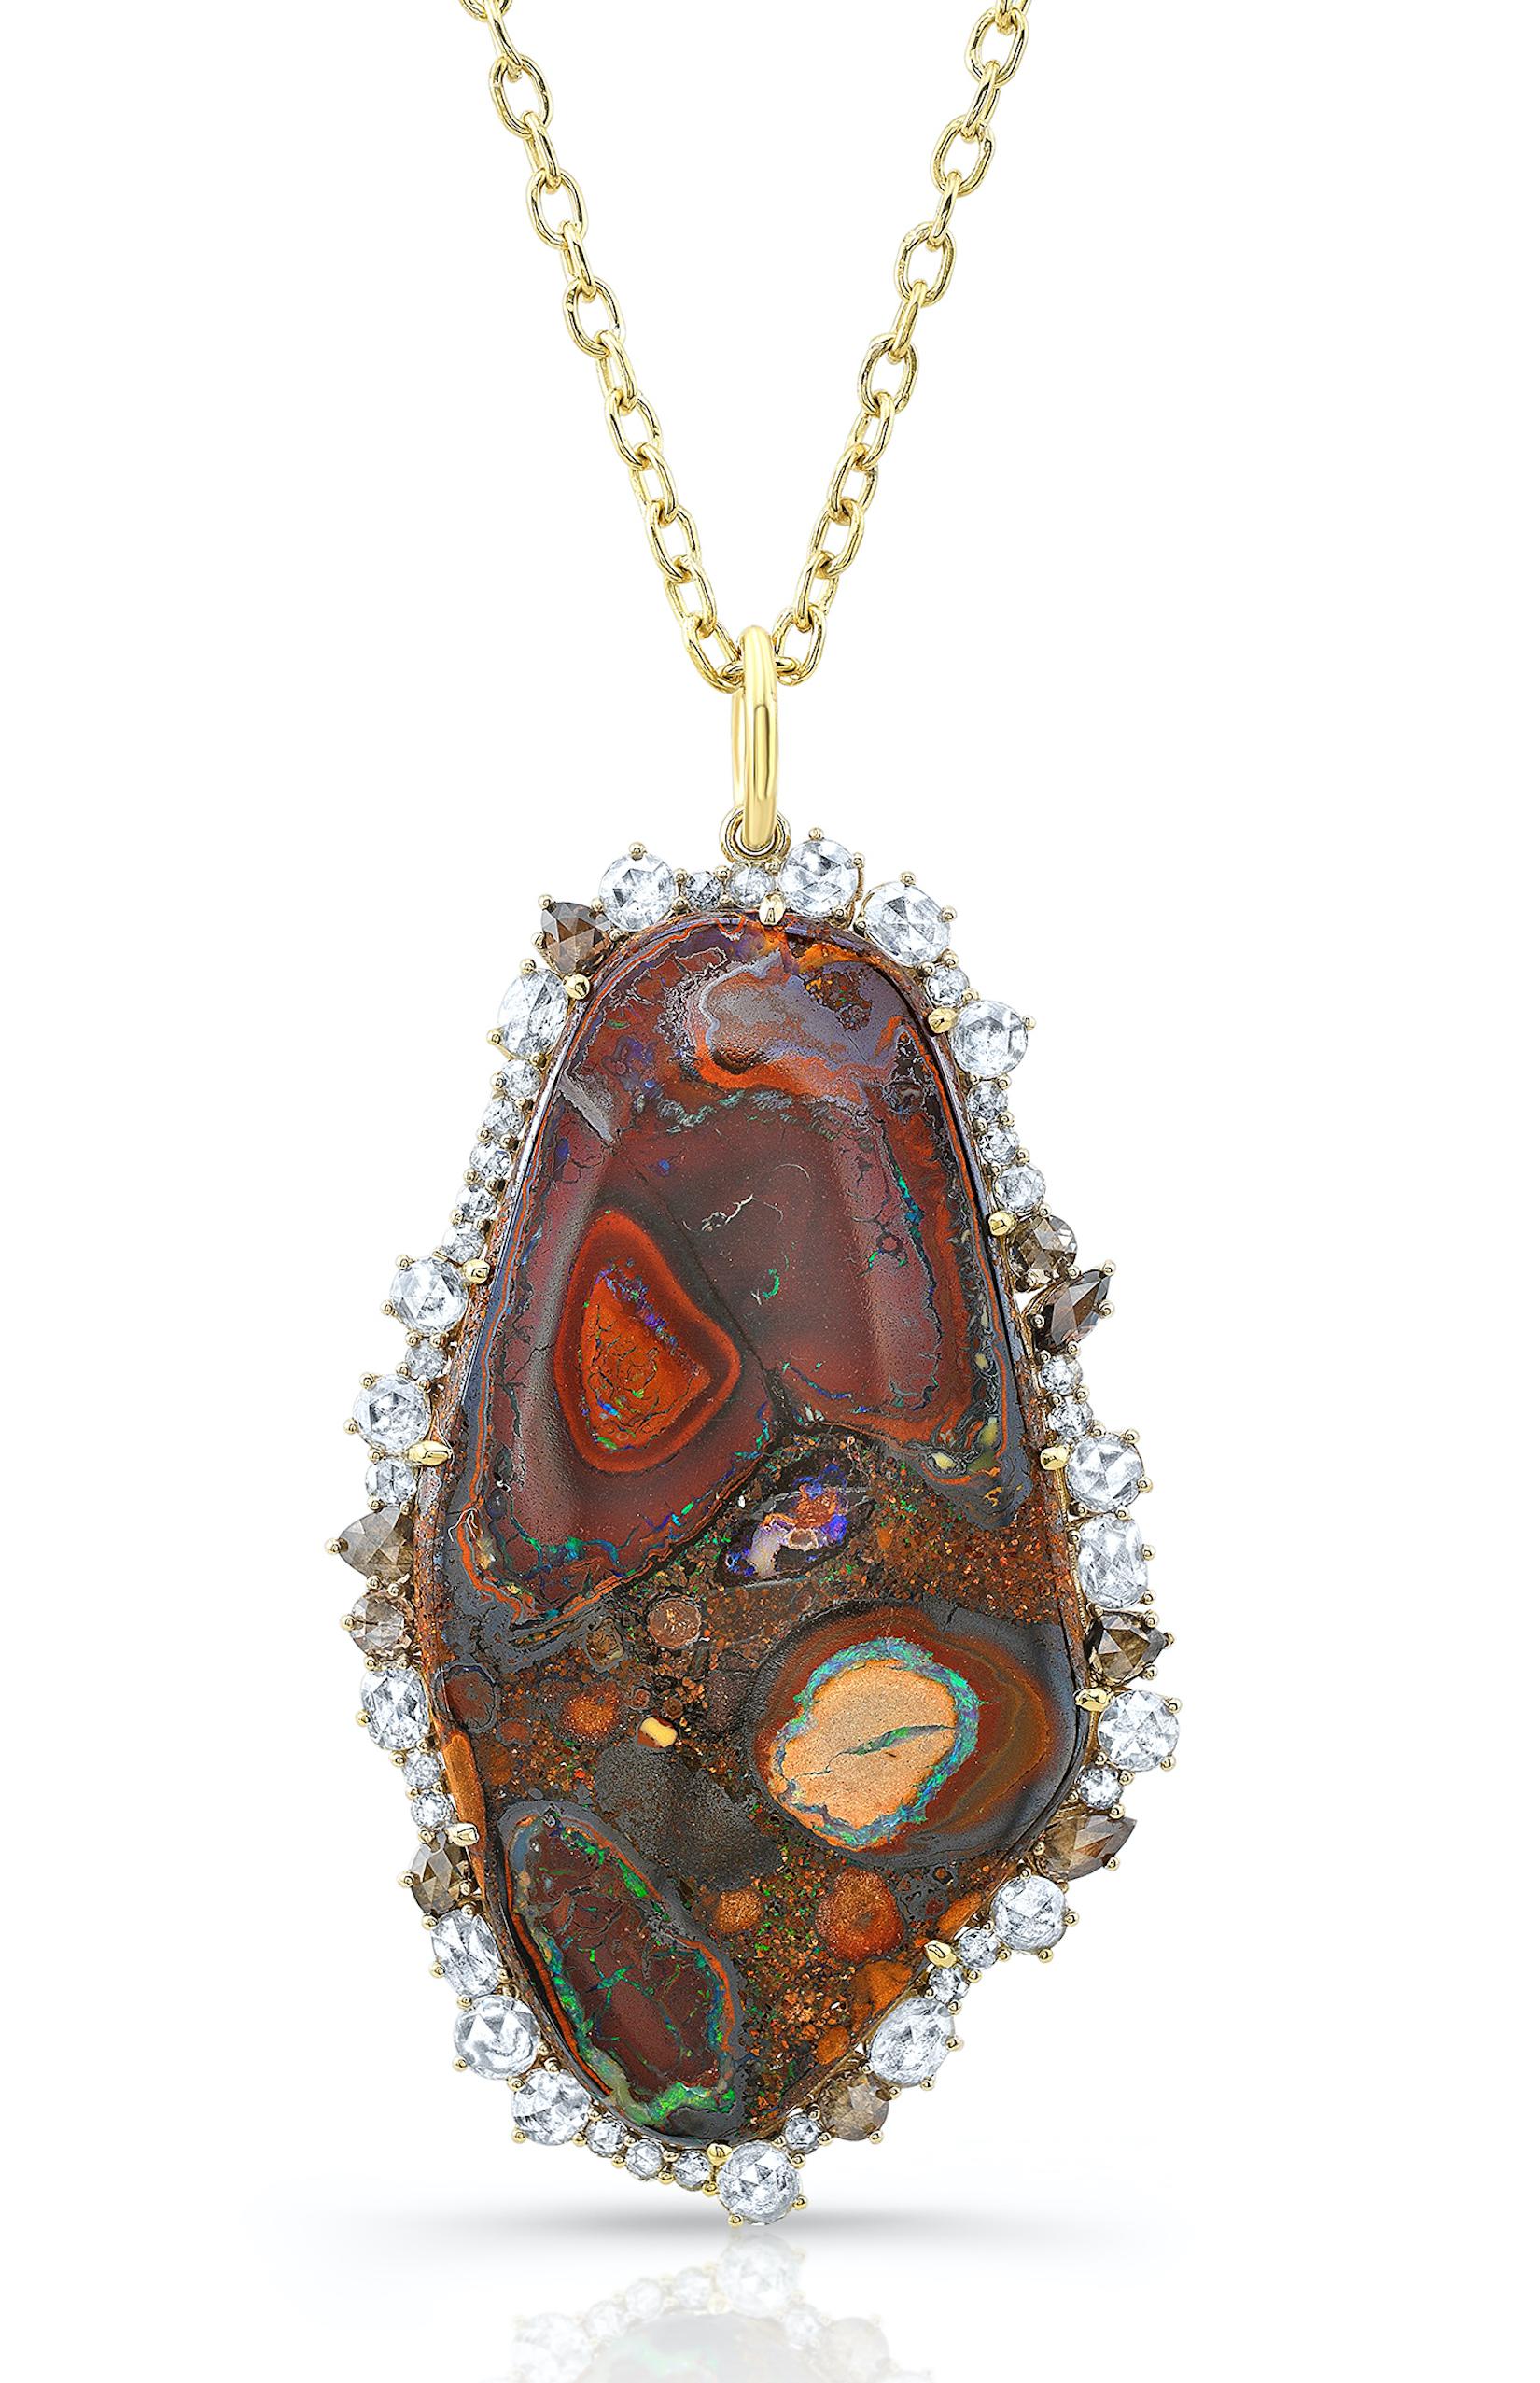 Amy Y's contemporary boulder opal and diamond pendant necklace is a one-of-a-kind piece for all occasions.  Amy's design delivers unparallel artistry by combining her uniquely multi-colored boulder opal with rose-cut diamonds.  Superbly set in